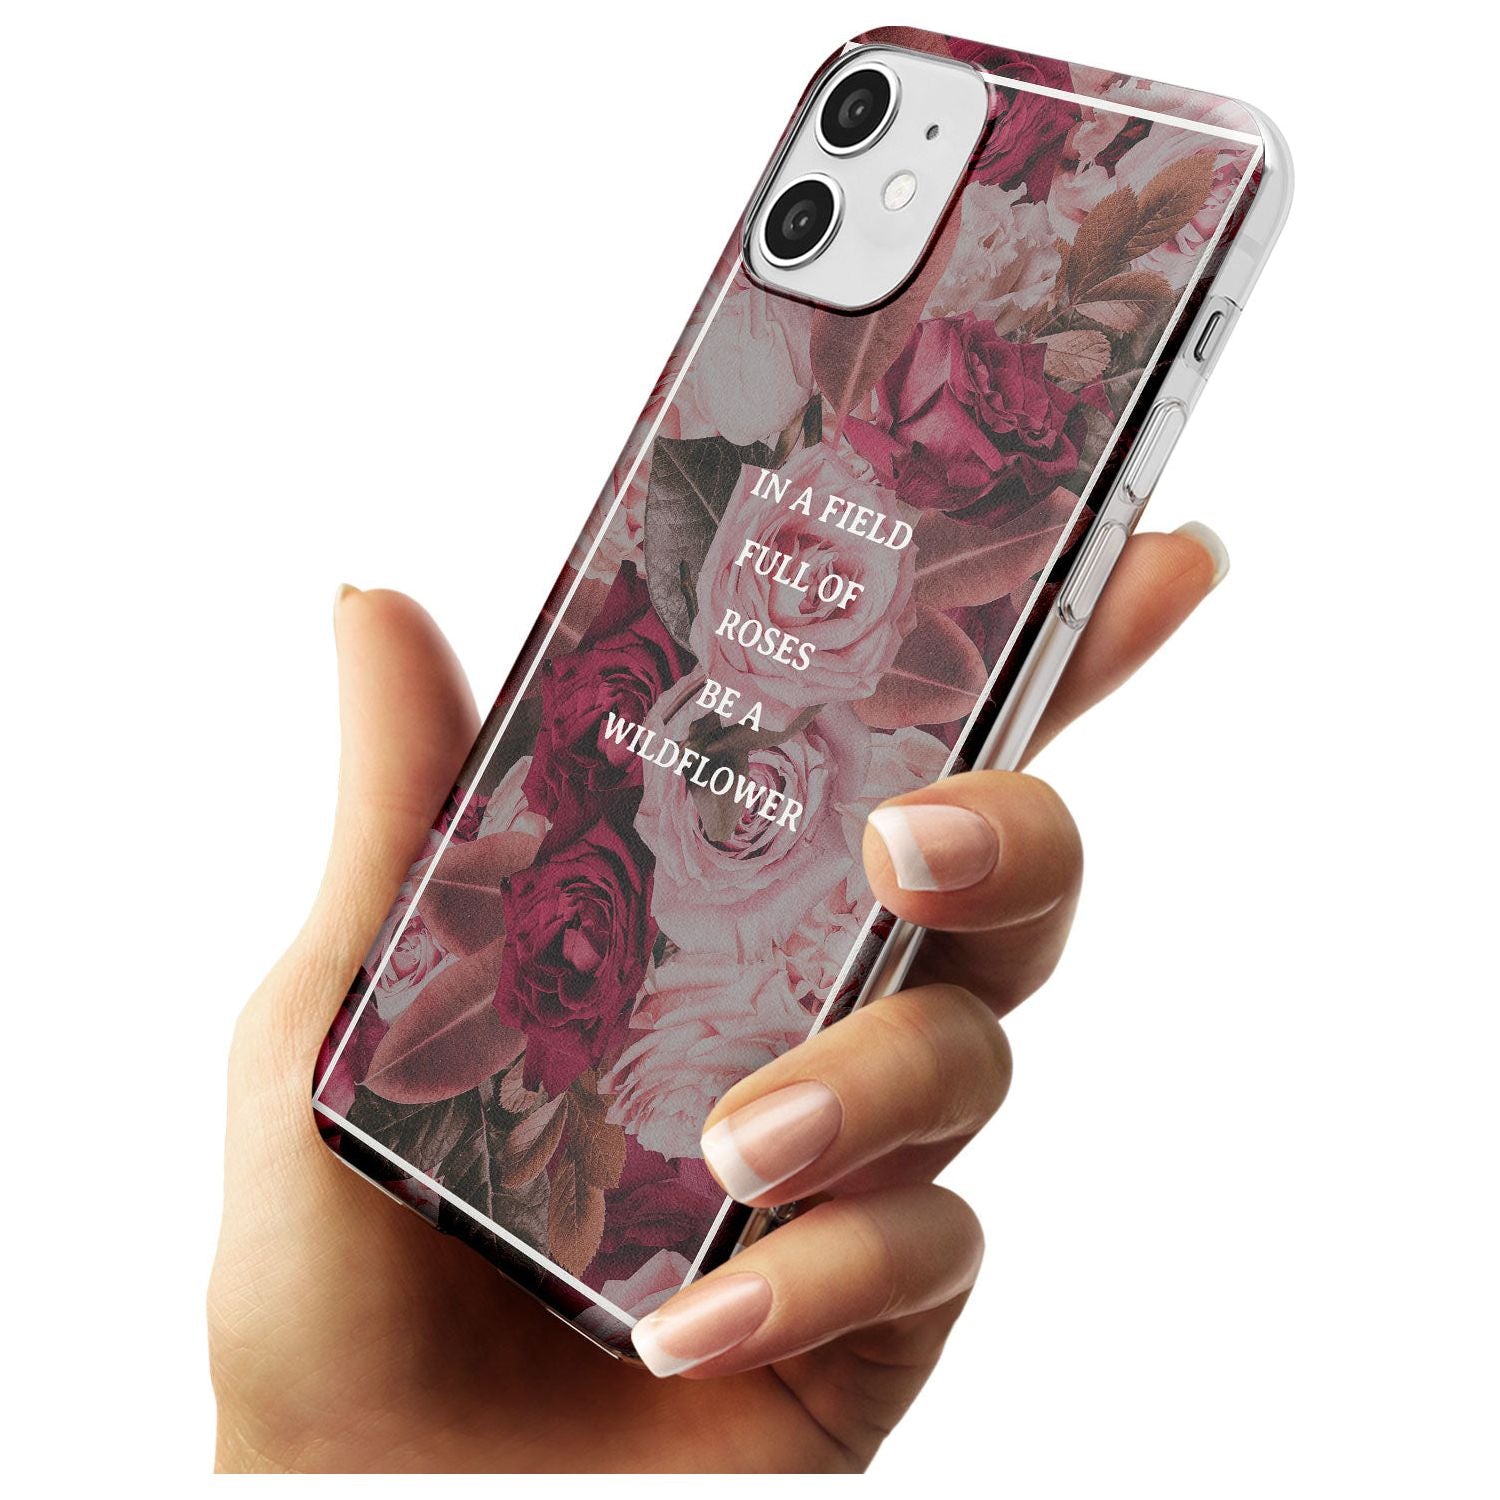 Be a Wildflower Floral Quote Slim TPU Phone Case for iPhone 11